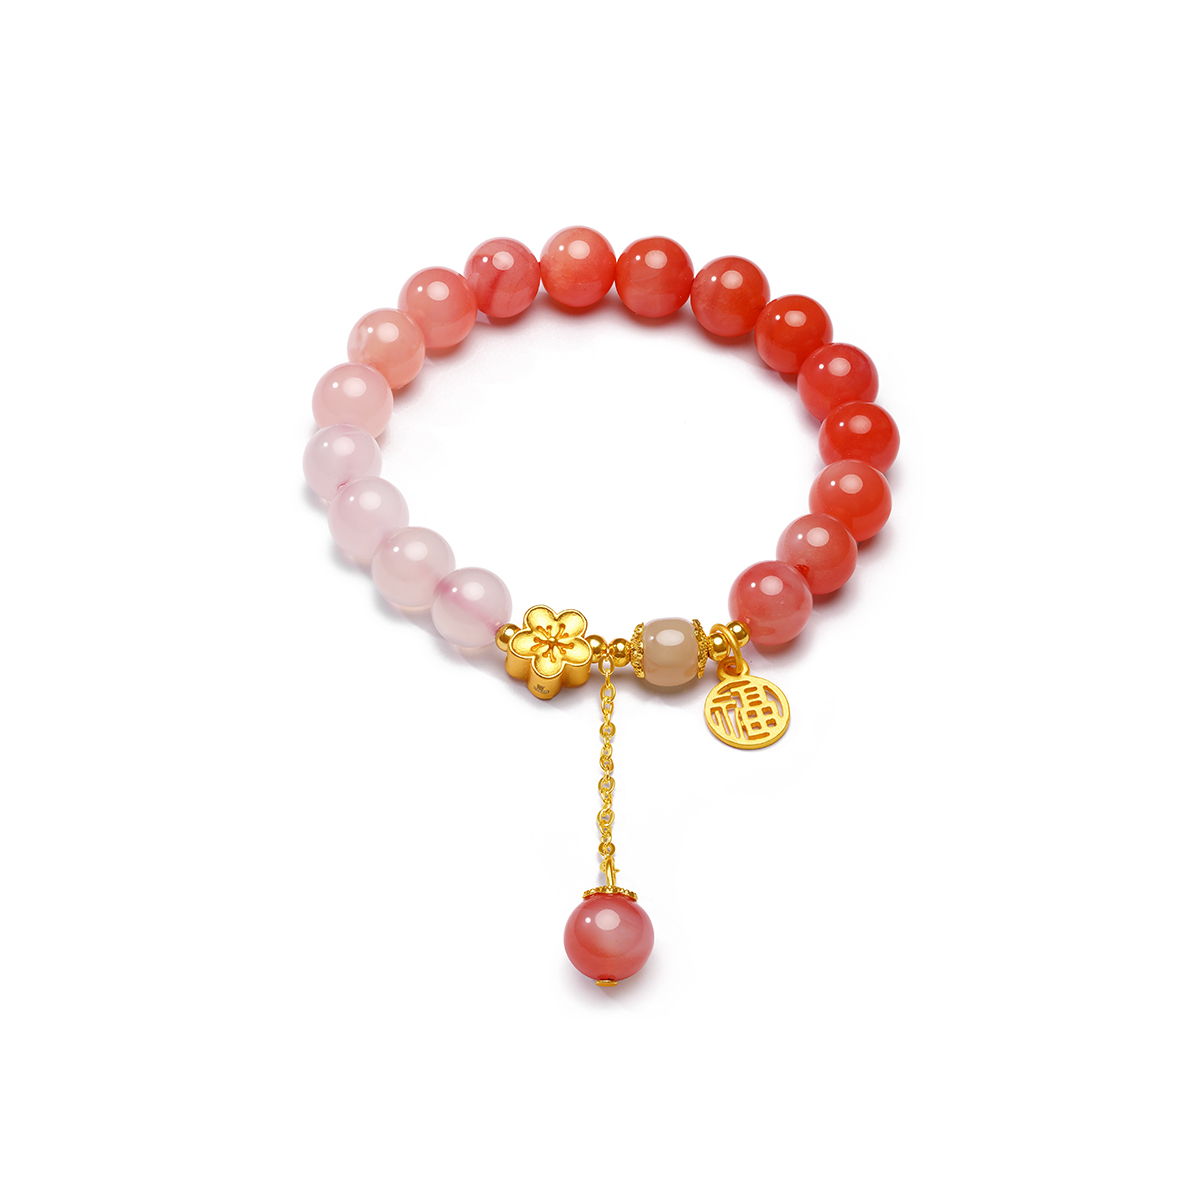 Wine red peach blossom blessing S925 silver bracelet red agate bracelet suitable for daily use